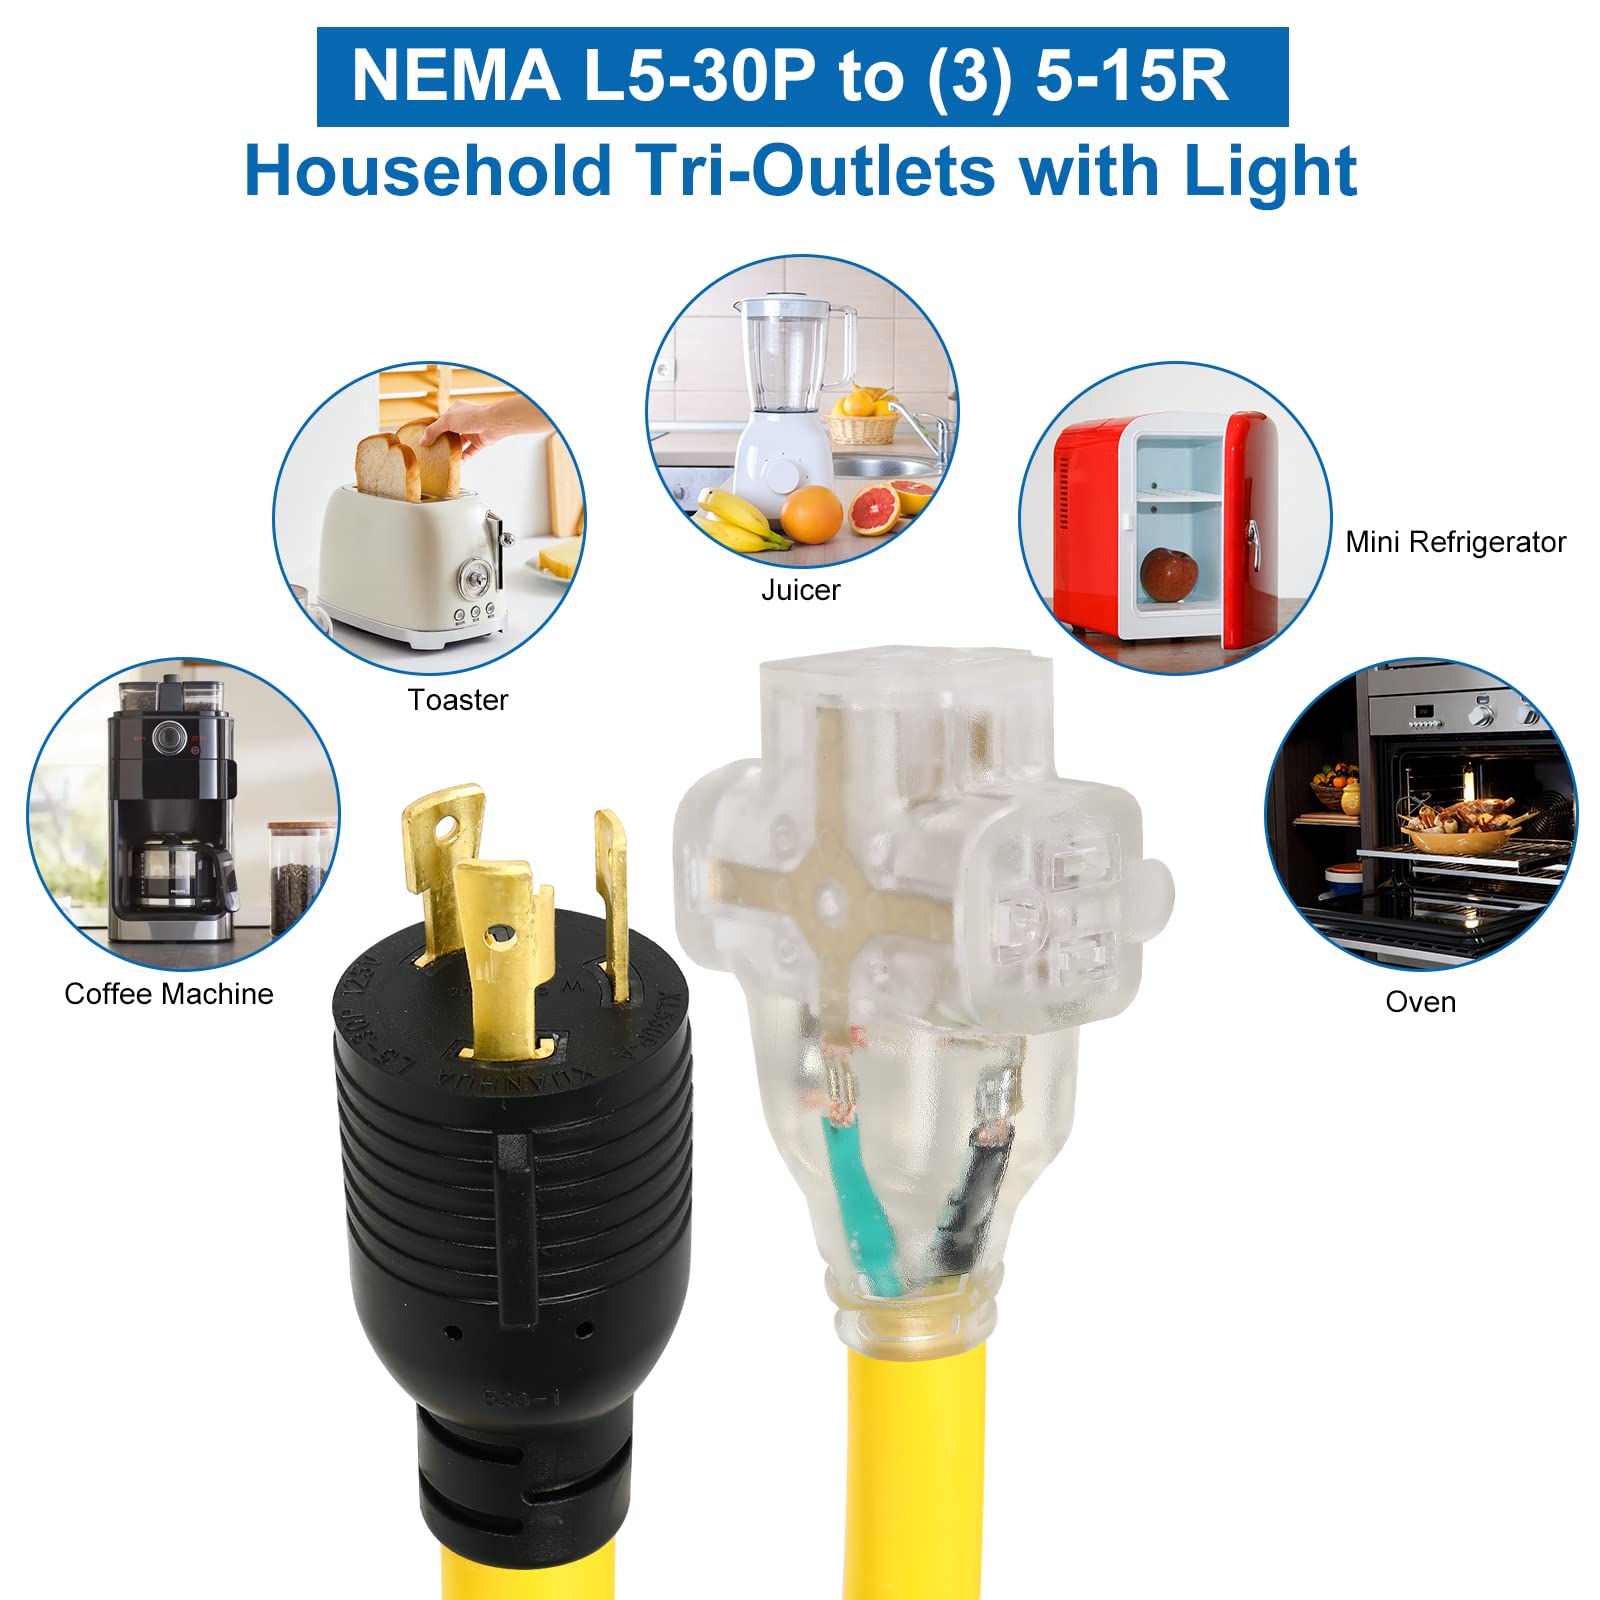 3FT NEMA L5-30P to (3) 5-15R, ZDHQLHJ Generator Power Extension Cord with LED Power Indicator, Heavy Duty 3 Prong 30 Amp L5-30P Male to 15 Amp 5-15R Female